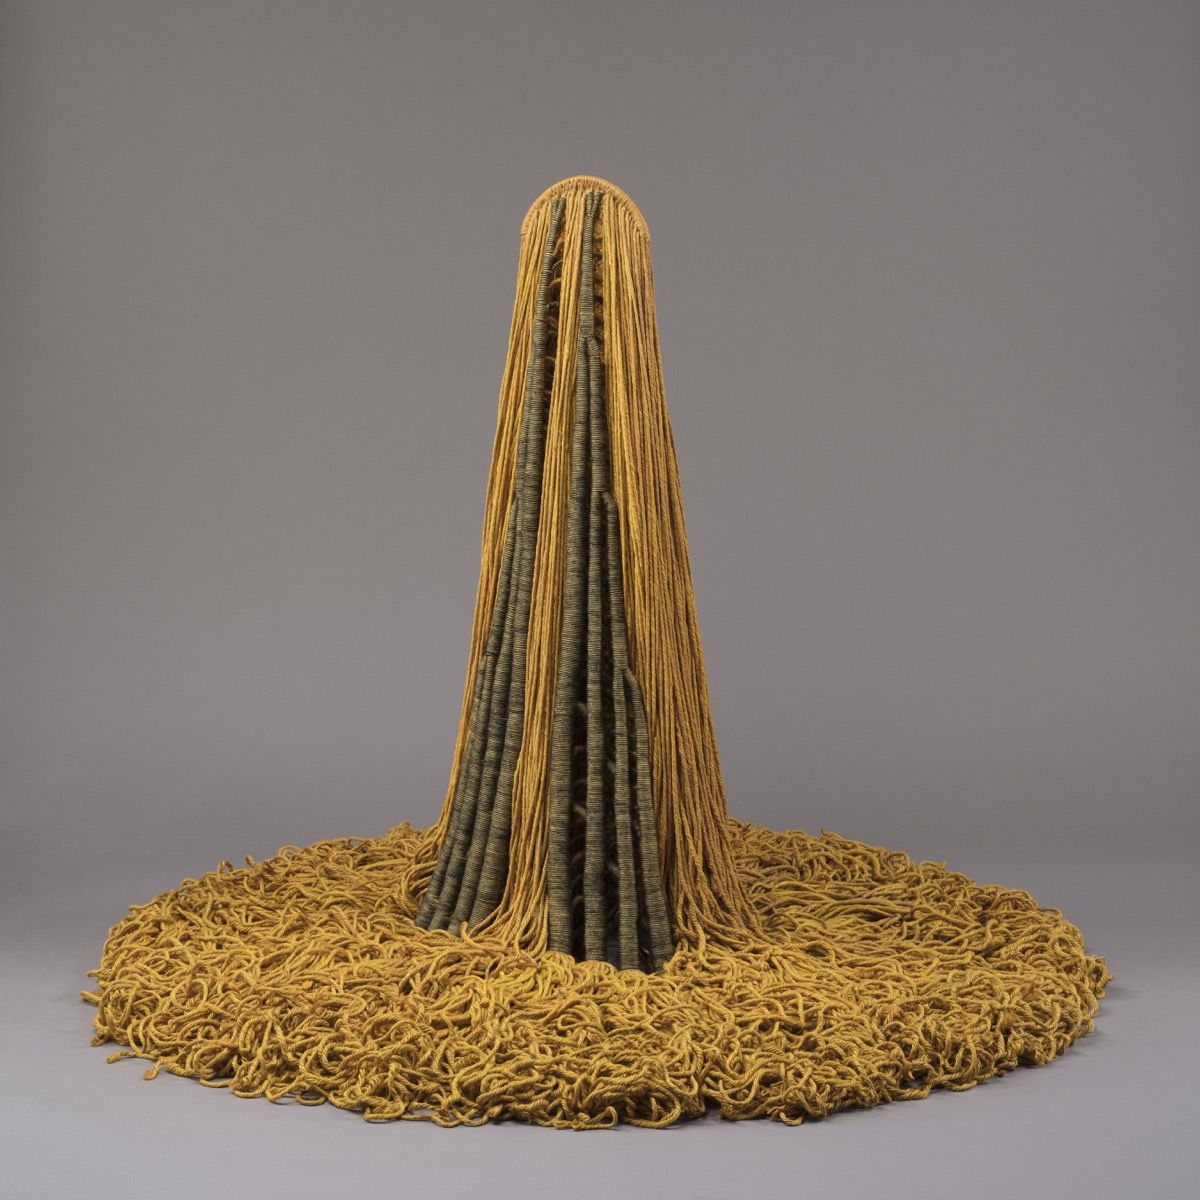 Claire Zeisler, Free Standing Yellow, 1968, shown at Weaving Beyond the Bauhaus. Courtesy of the Art Institute of Chicago.